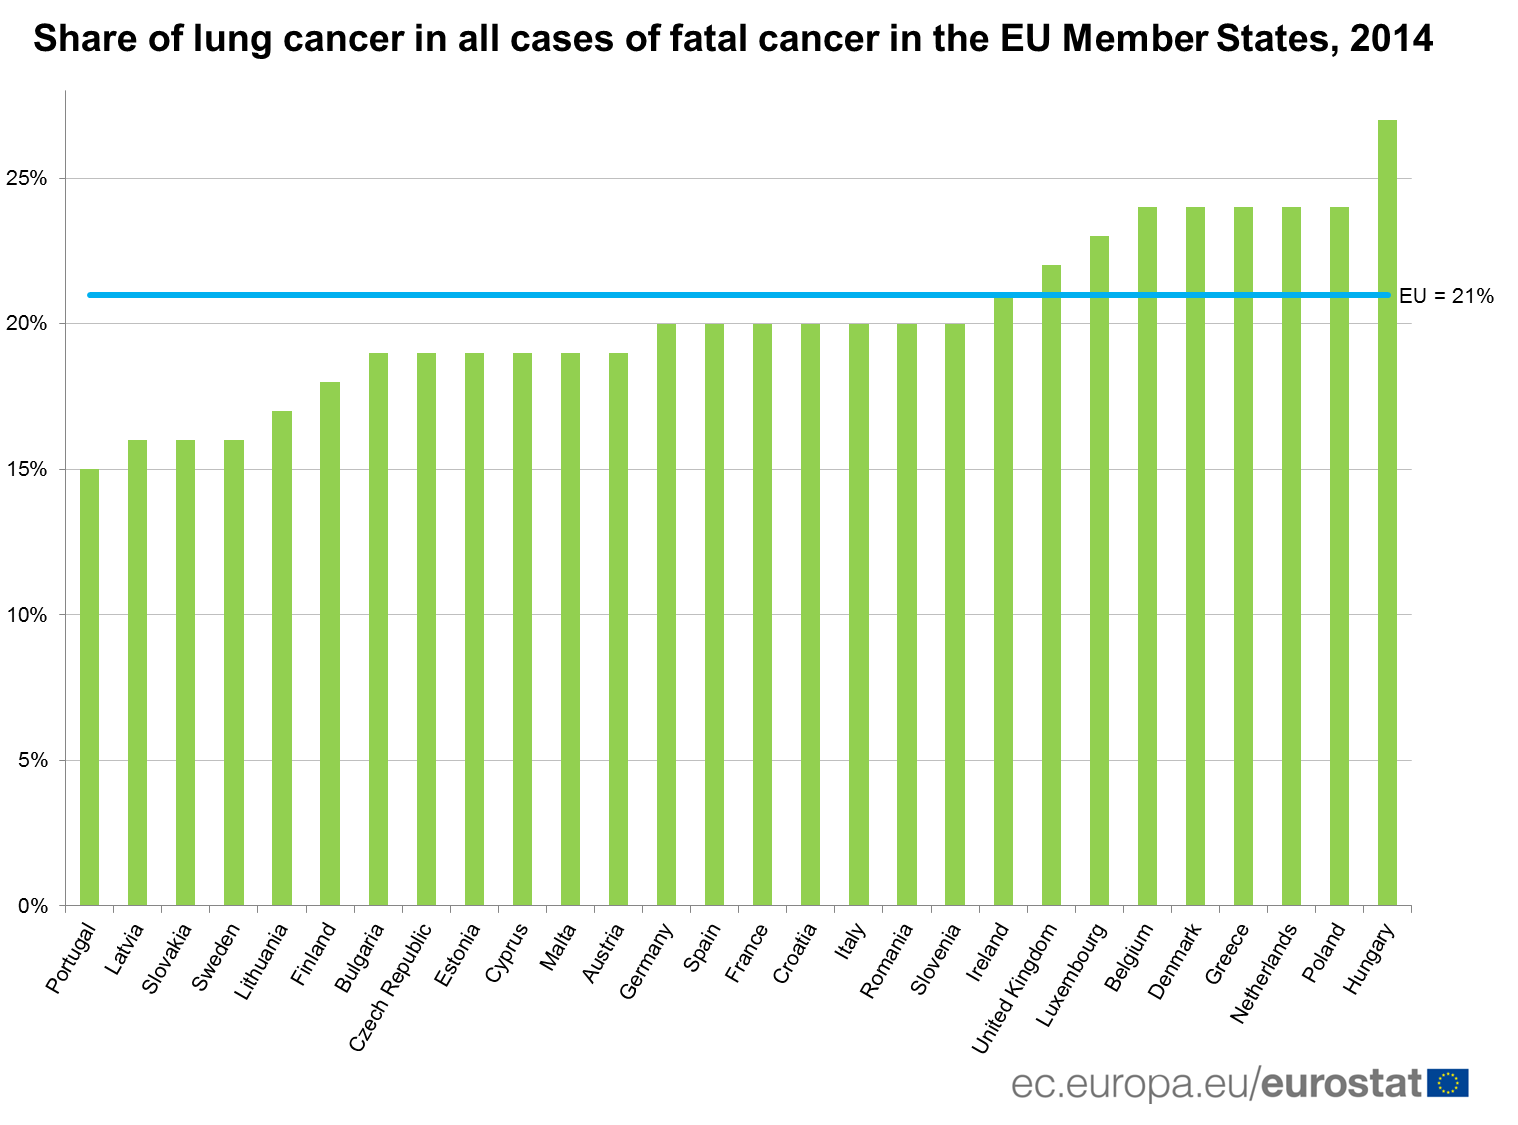 Smoking and health lung cancer, the malignant tumor that causes most deaths in the EU